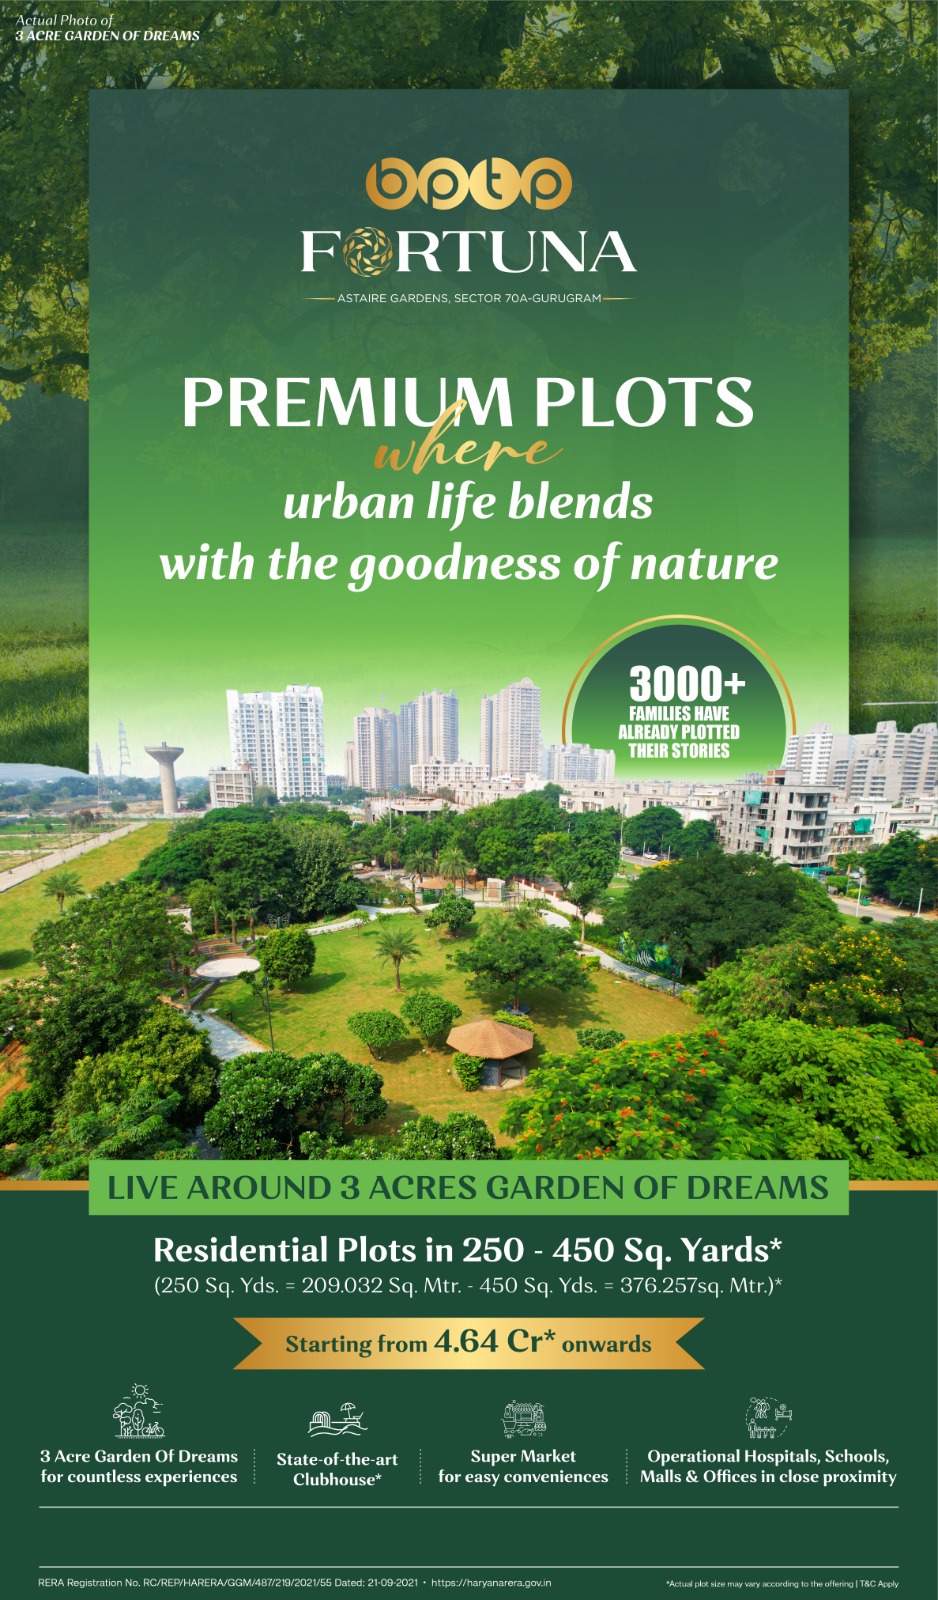 Residential plots price starts Rs 4.64 Cr at BPTP Fortuna in Sector 70A, Gurgaon Update